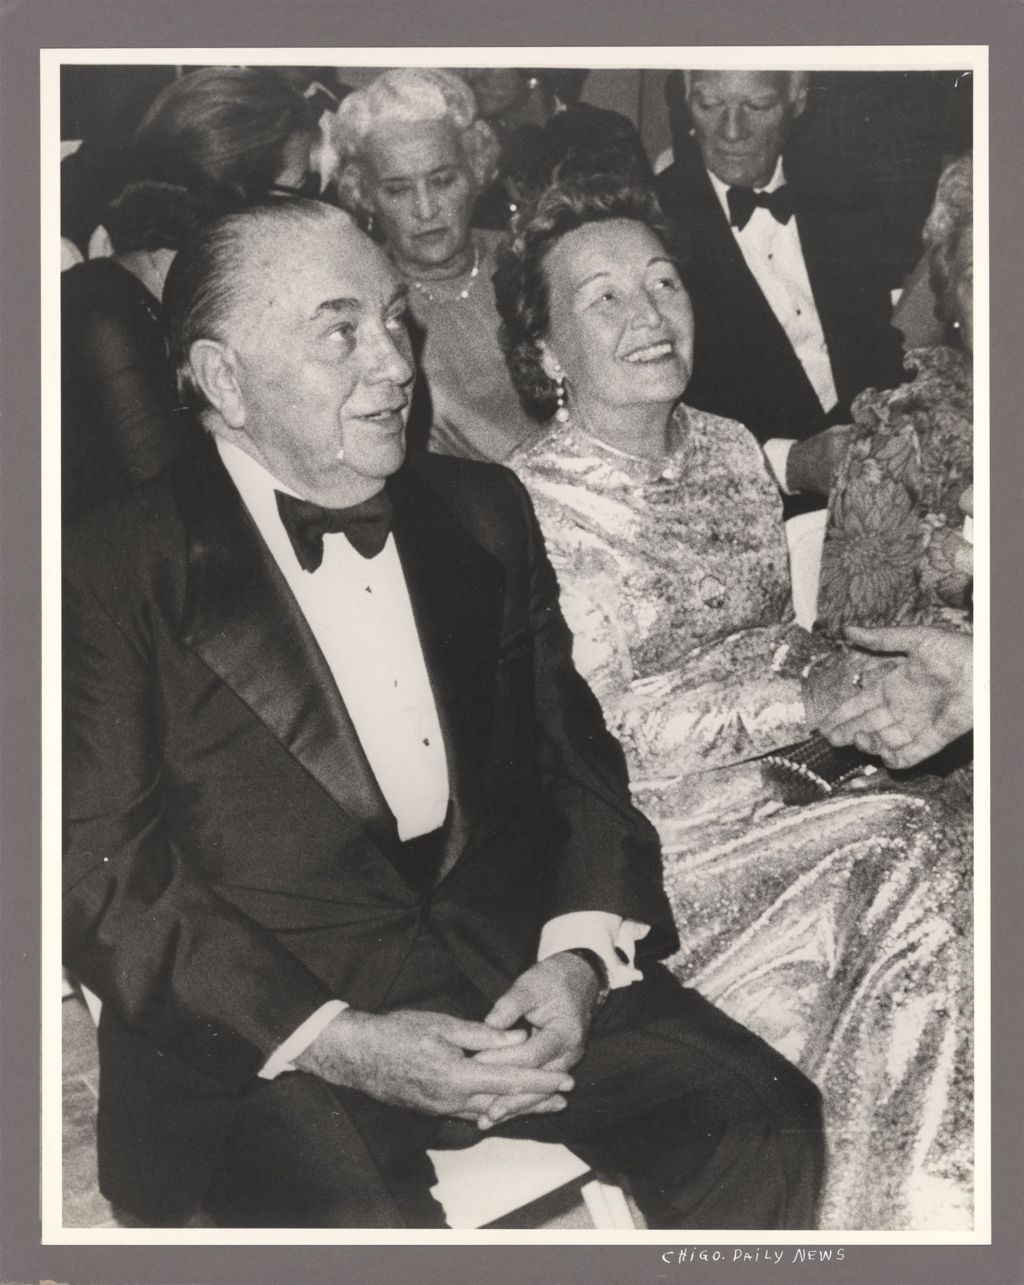 Richard J. Daley and Eleanor Daley at a formal event.